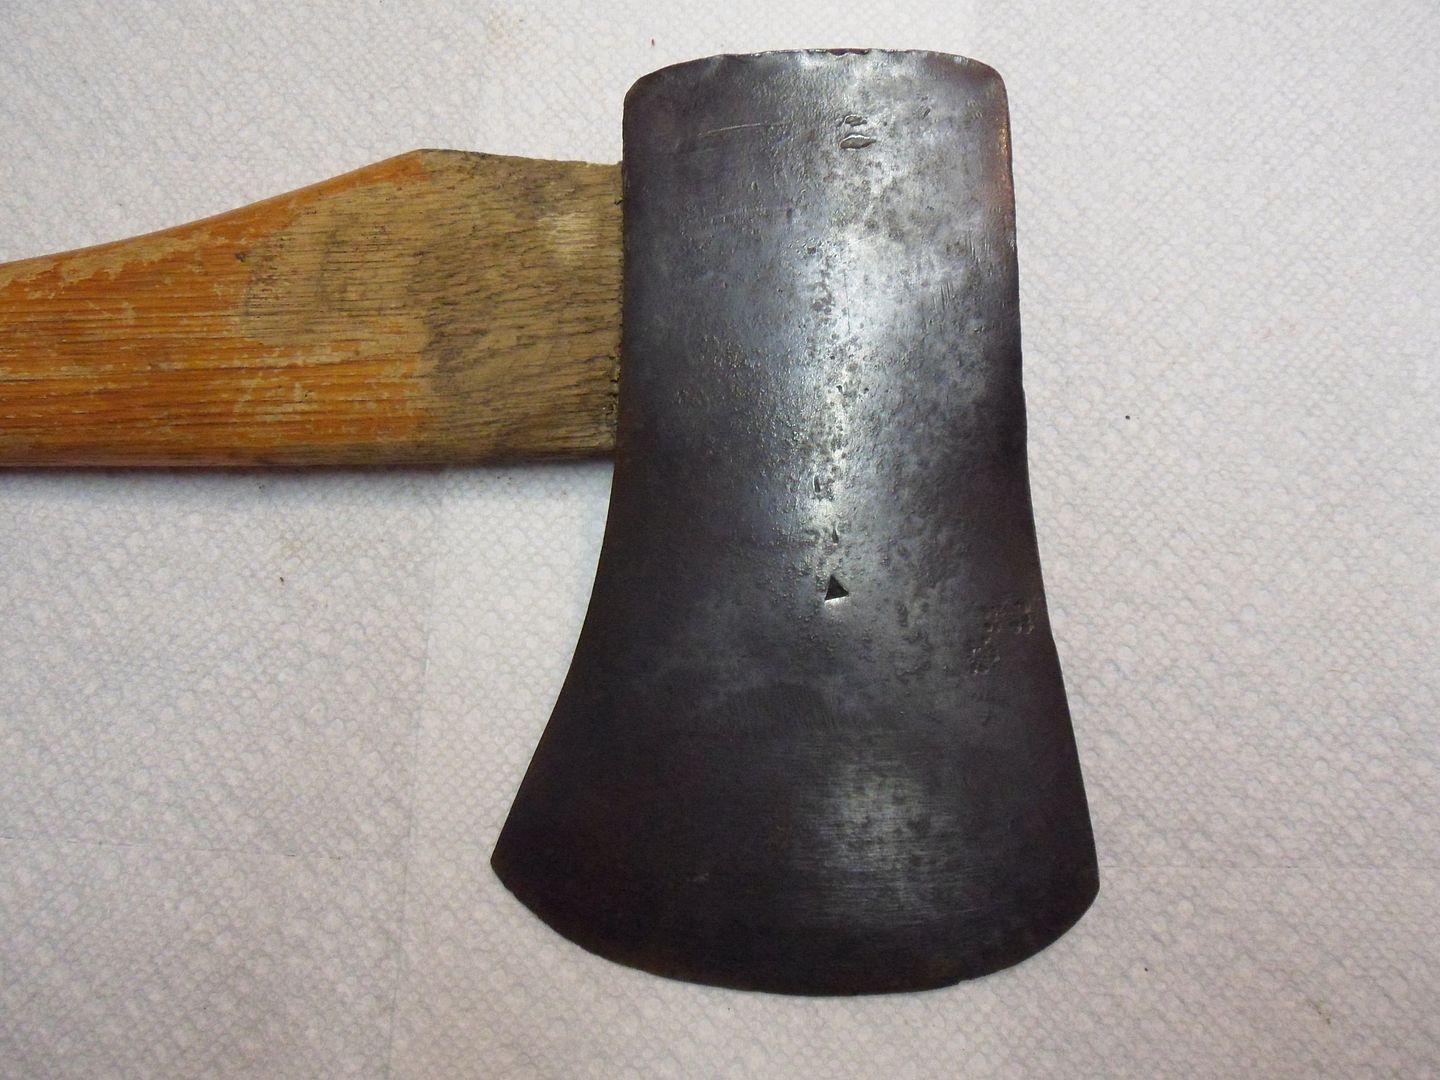 dating old axe heads